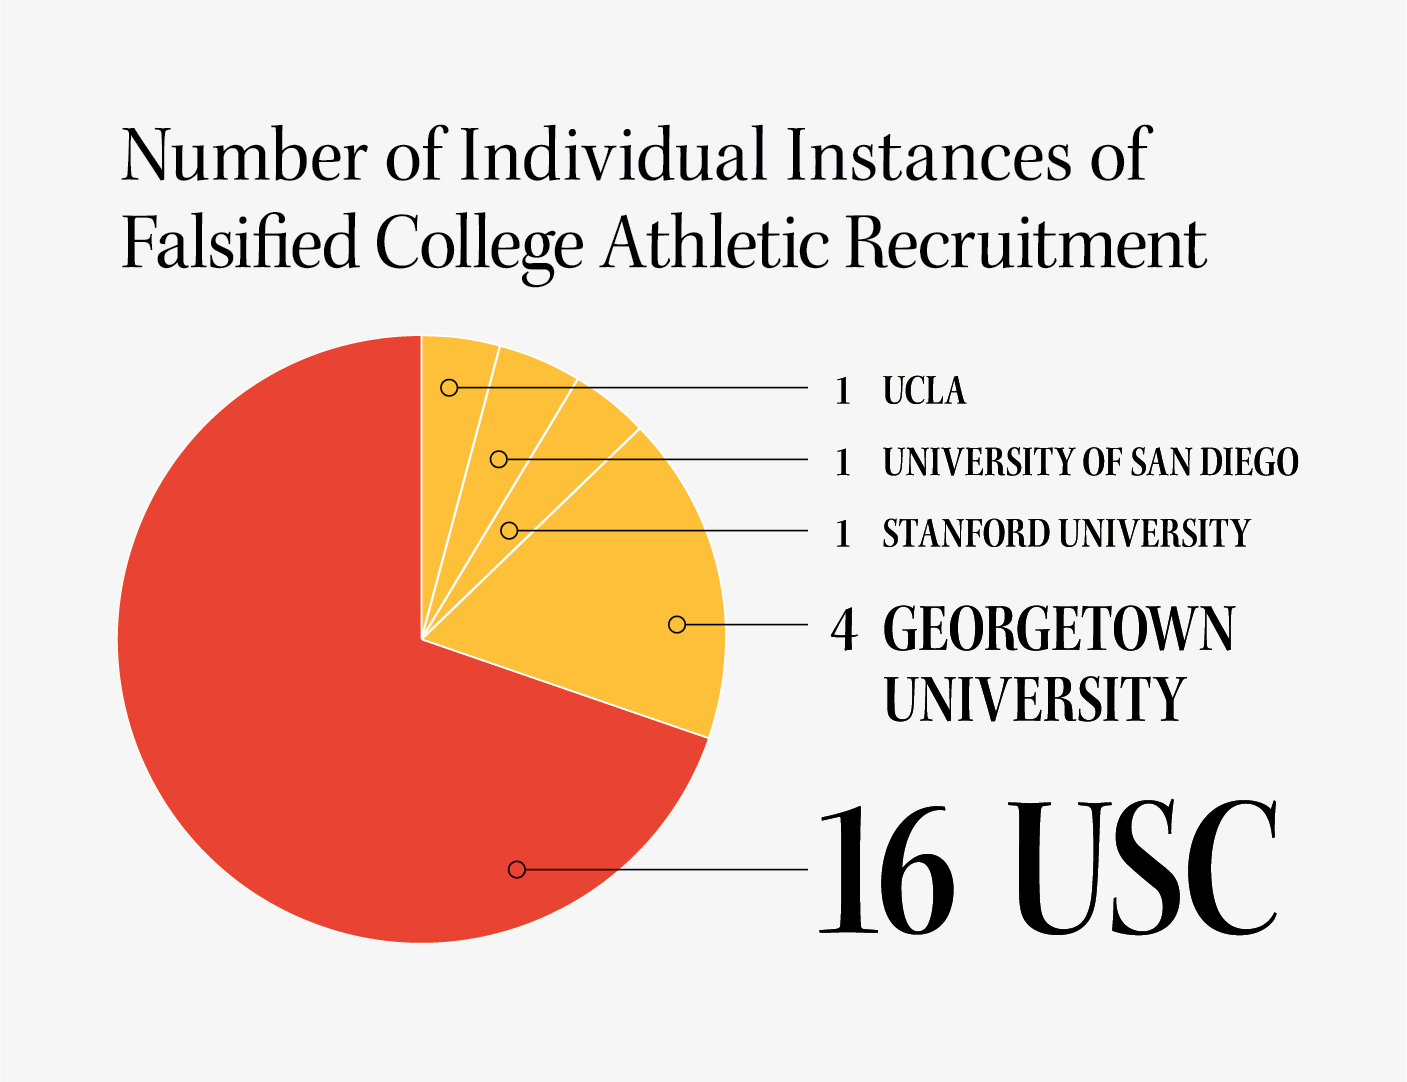 USC at forefront of national college admissions scandal - Daily Trojan